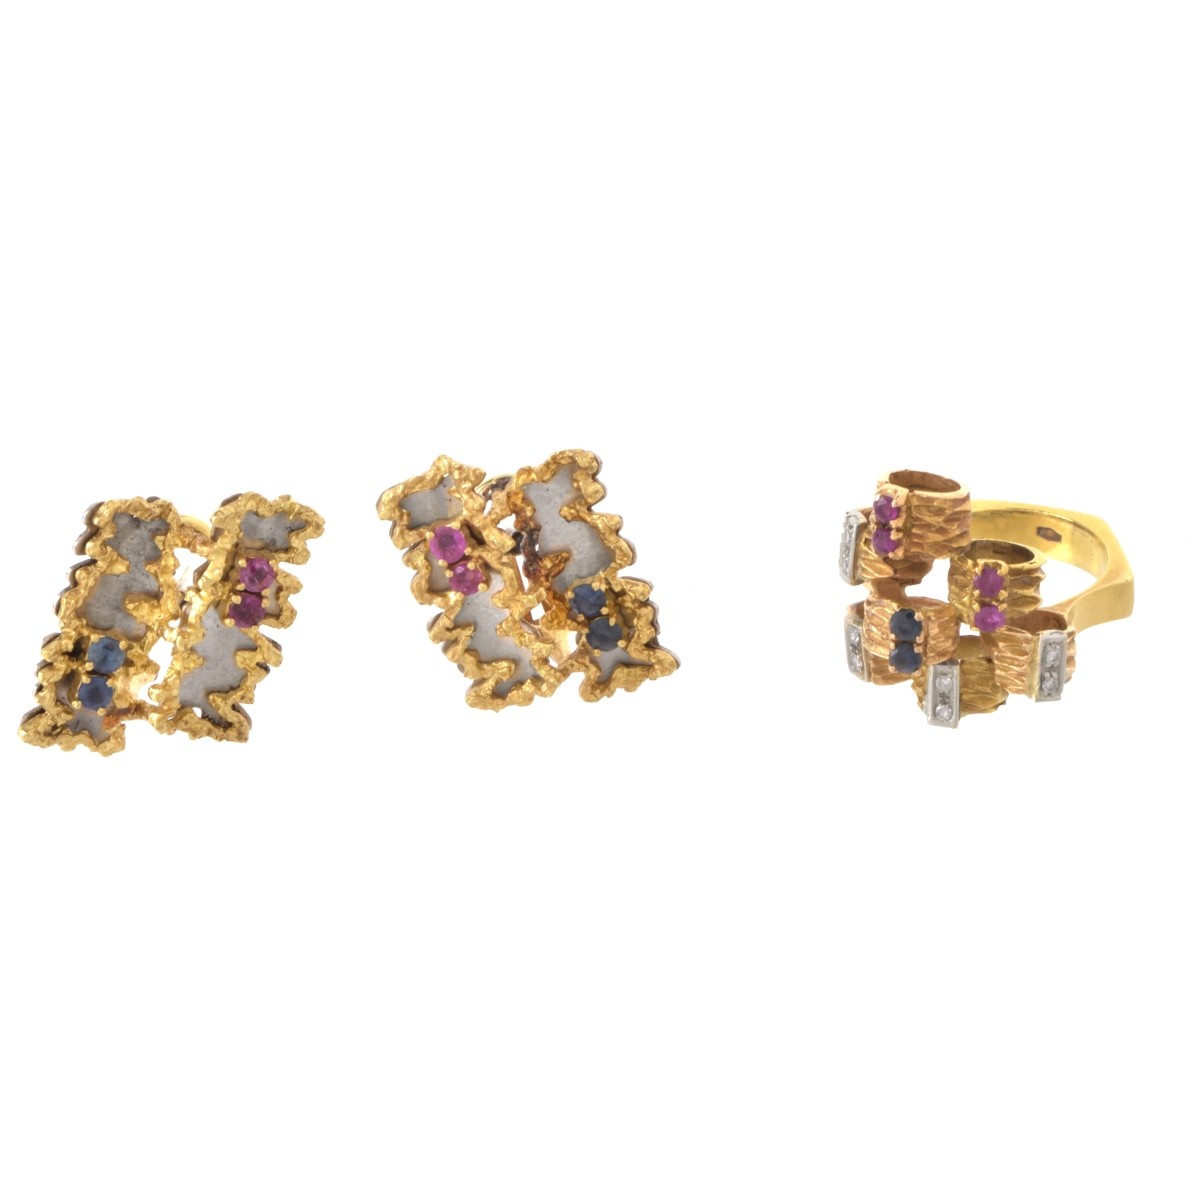 Gemstone and 18K Ring and Earrings